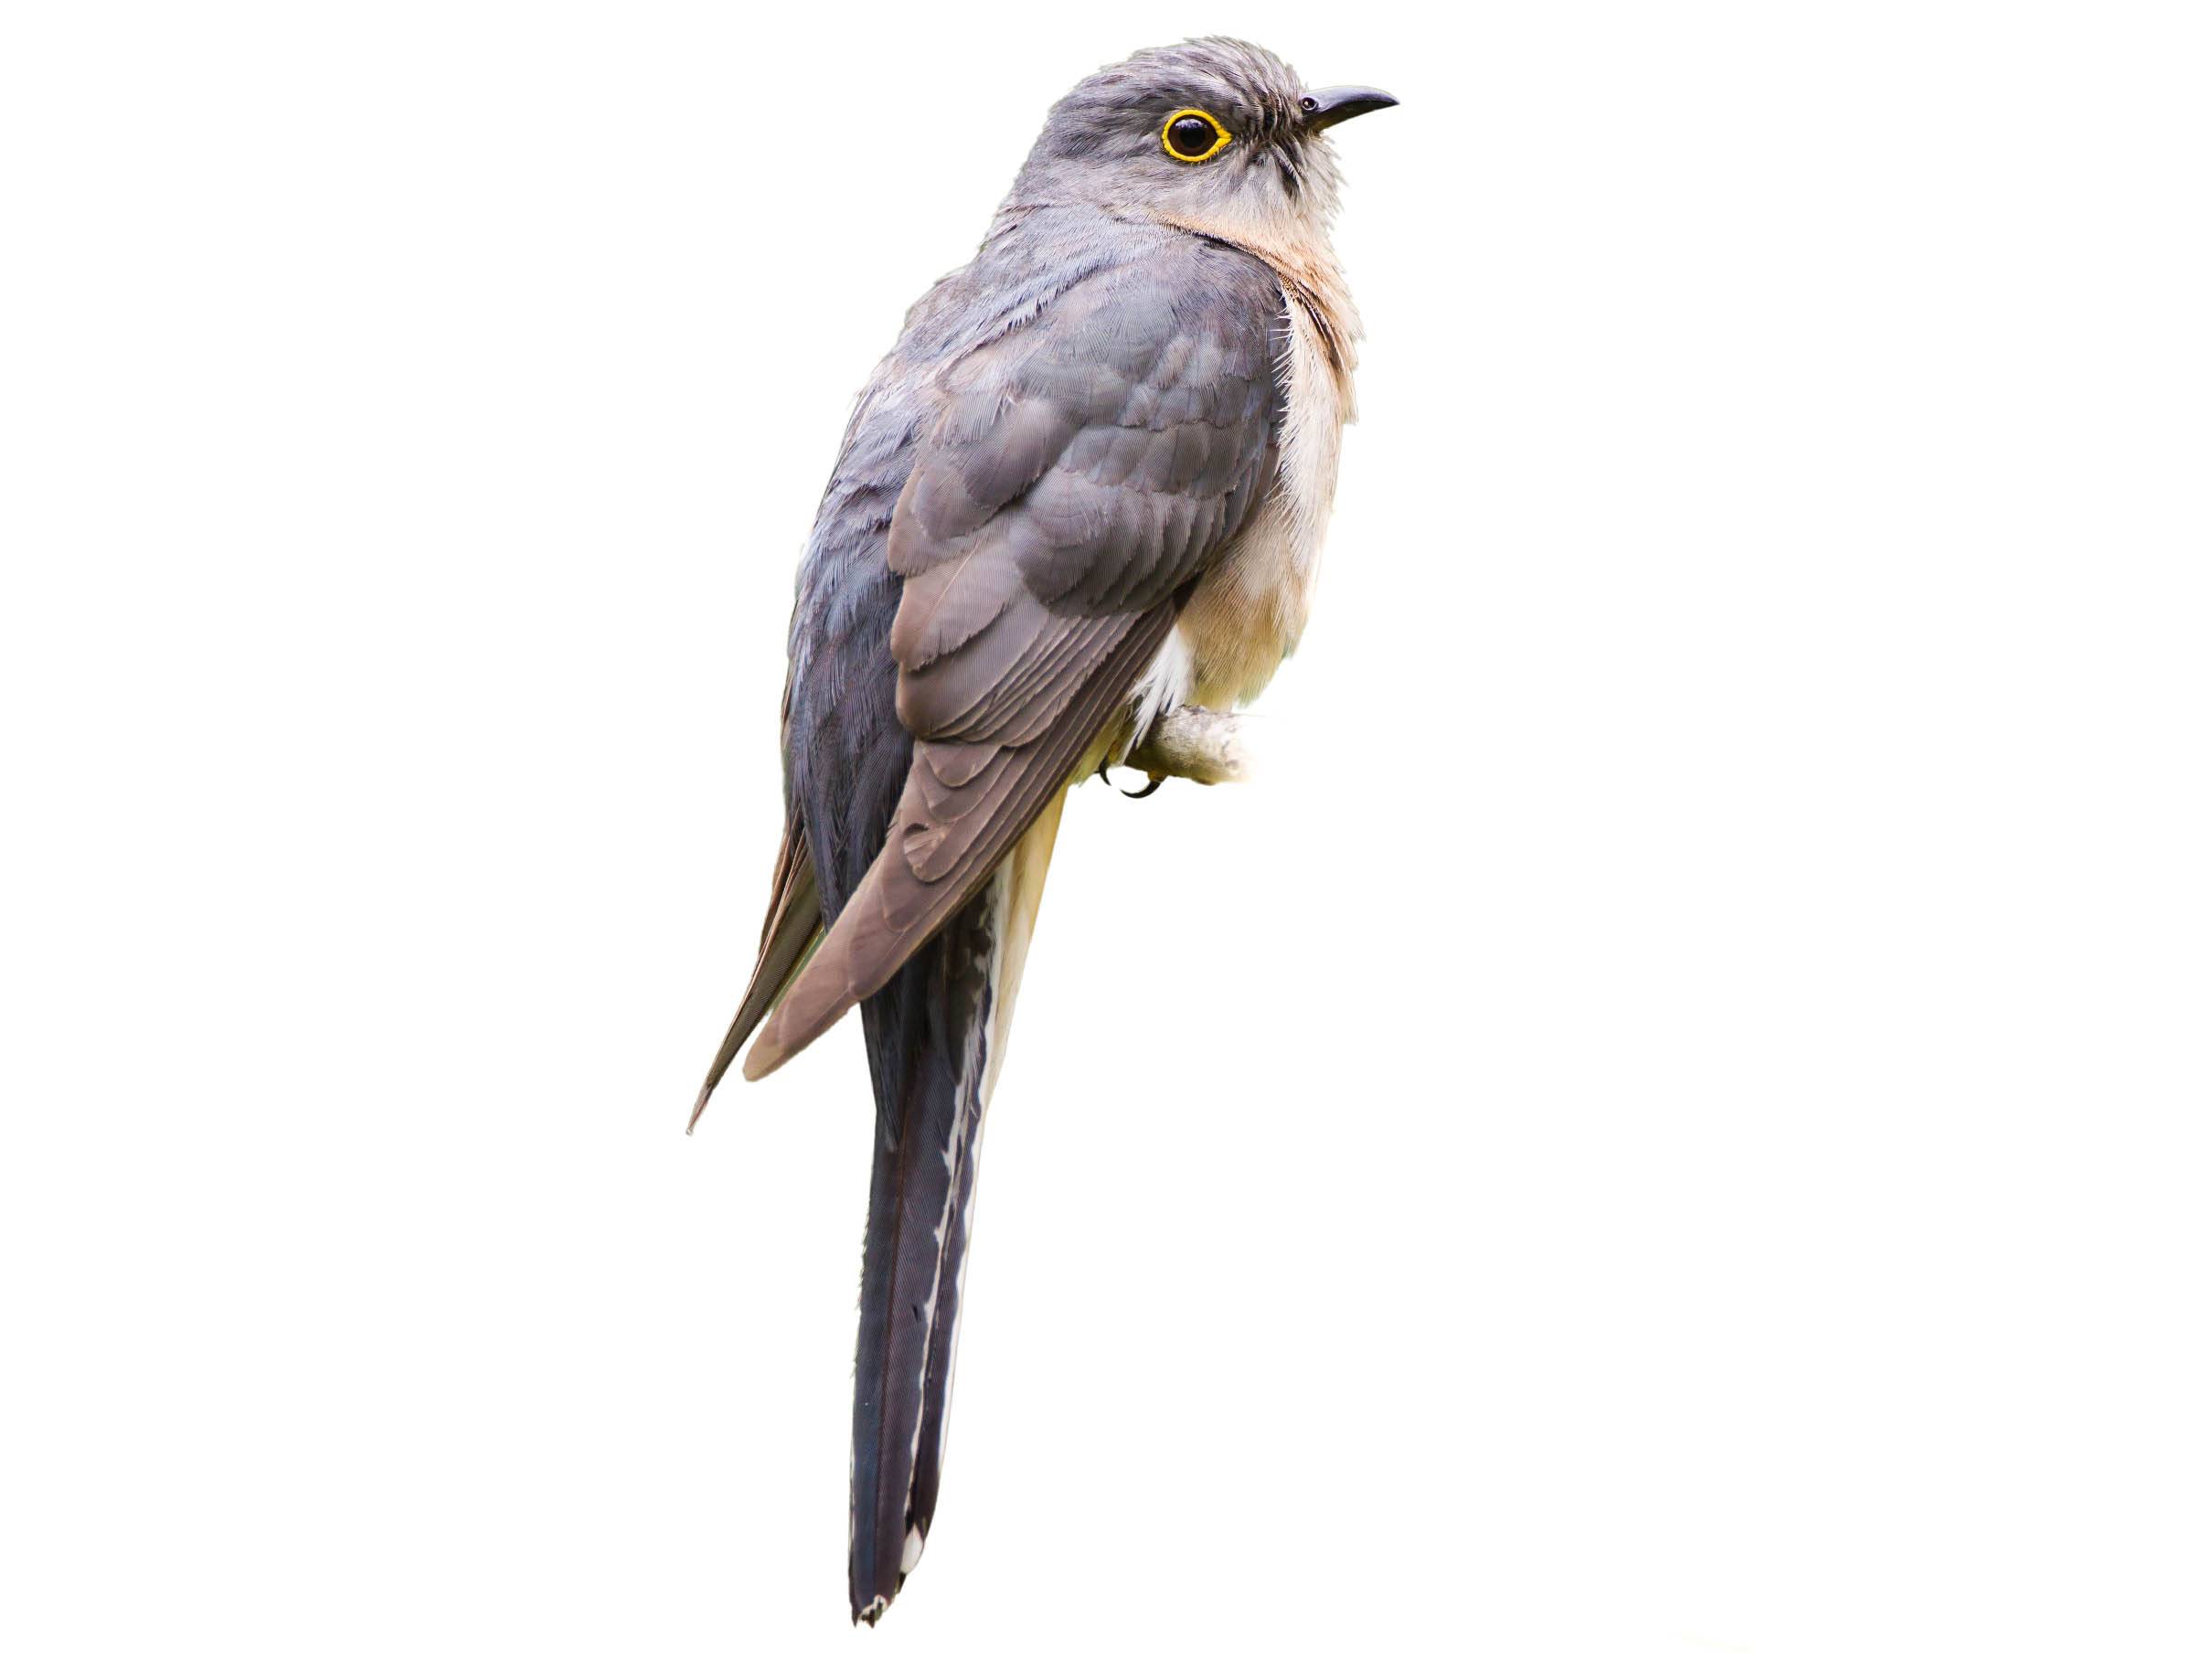 A photo of a Fan-tailed Cuckoo (Cacomantis flabelliformis)